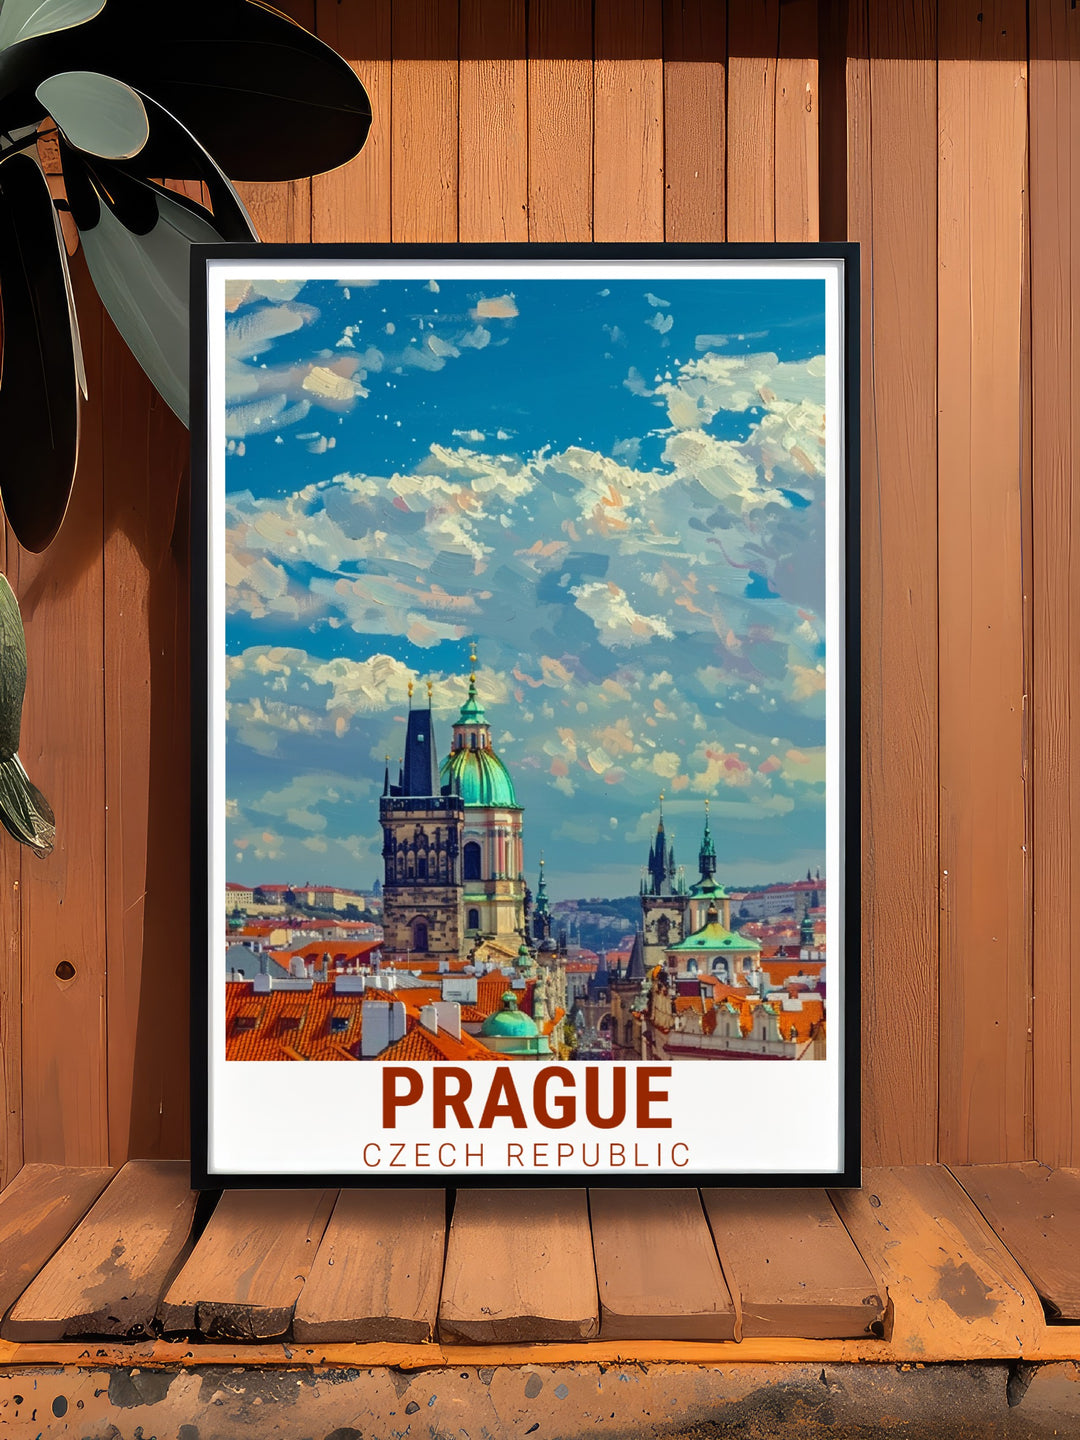 Prague travel print with a detailed view of the Old Town Square perfect for those who appreciate Gothic architecture and want to add a piece of Czech Republics rich history and beauty to their home or office decor